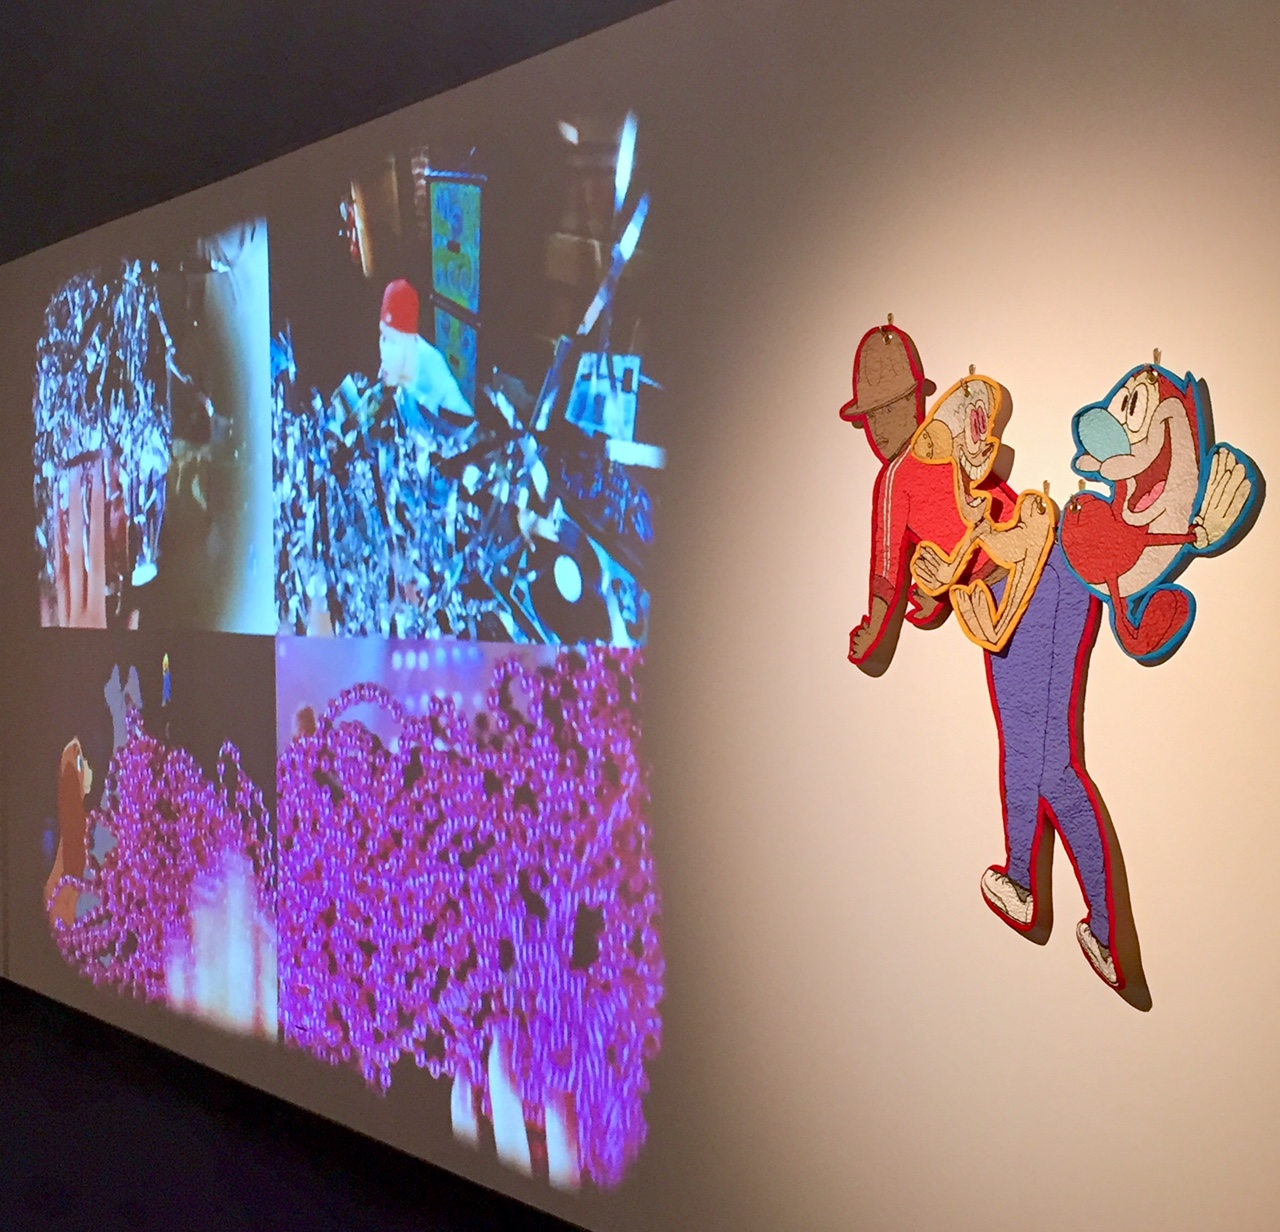 Installation View.  Video (right) and "Happy, Happy Joy Joy -- Pharrell Williams" (left).  Digitally printed and quilted cotton.  2017.